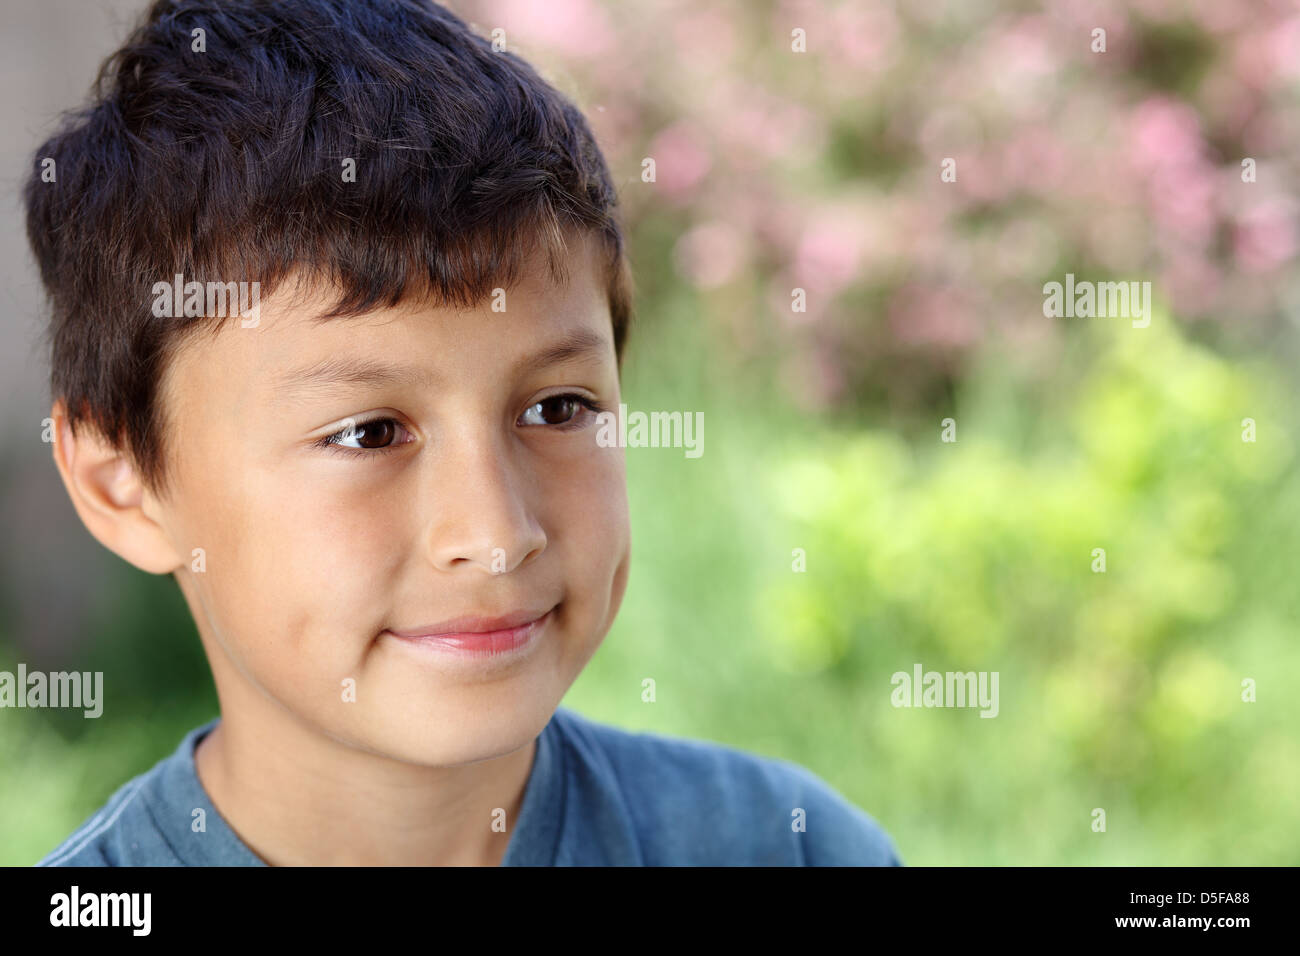 Smiling young boy outside with copy space to right Stock Photo